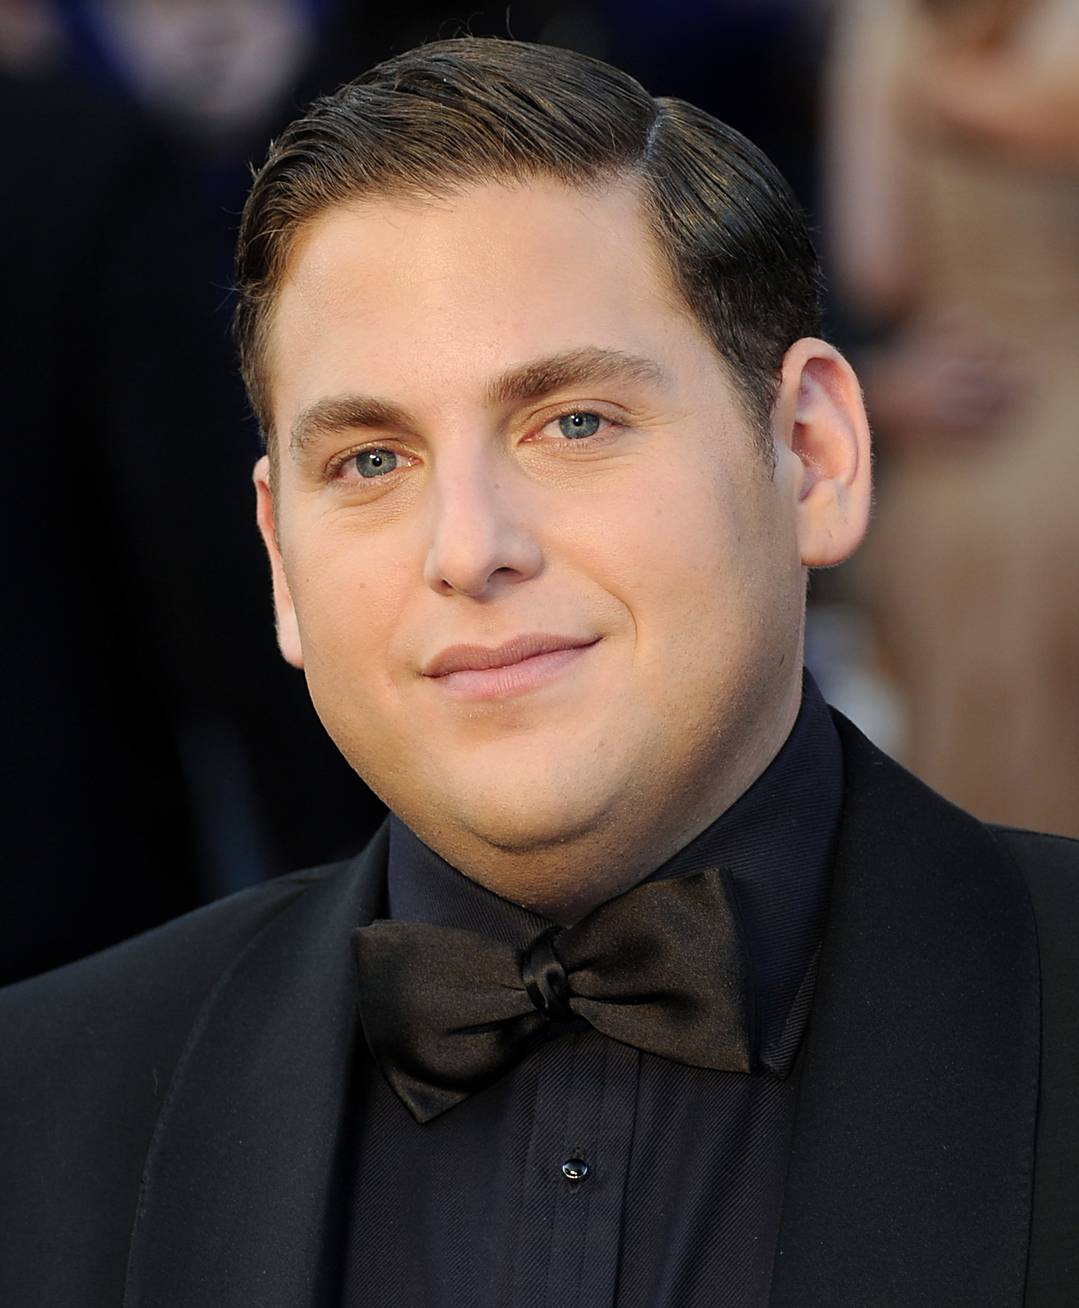 Jonah Hill - Superbad superstar Jonah Hill is starring alongside of hottie Channing Tatum in 21 Jump Street and taking his comedic edge to new levels.Oh yeah, he'll be on 106 &amp; Park tomorrow night with Channing to discuss the new movie and let you know why you won't want to miss 21 Jump Street!(Photo: Michael Buckner/Getty Images)